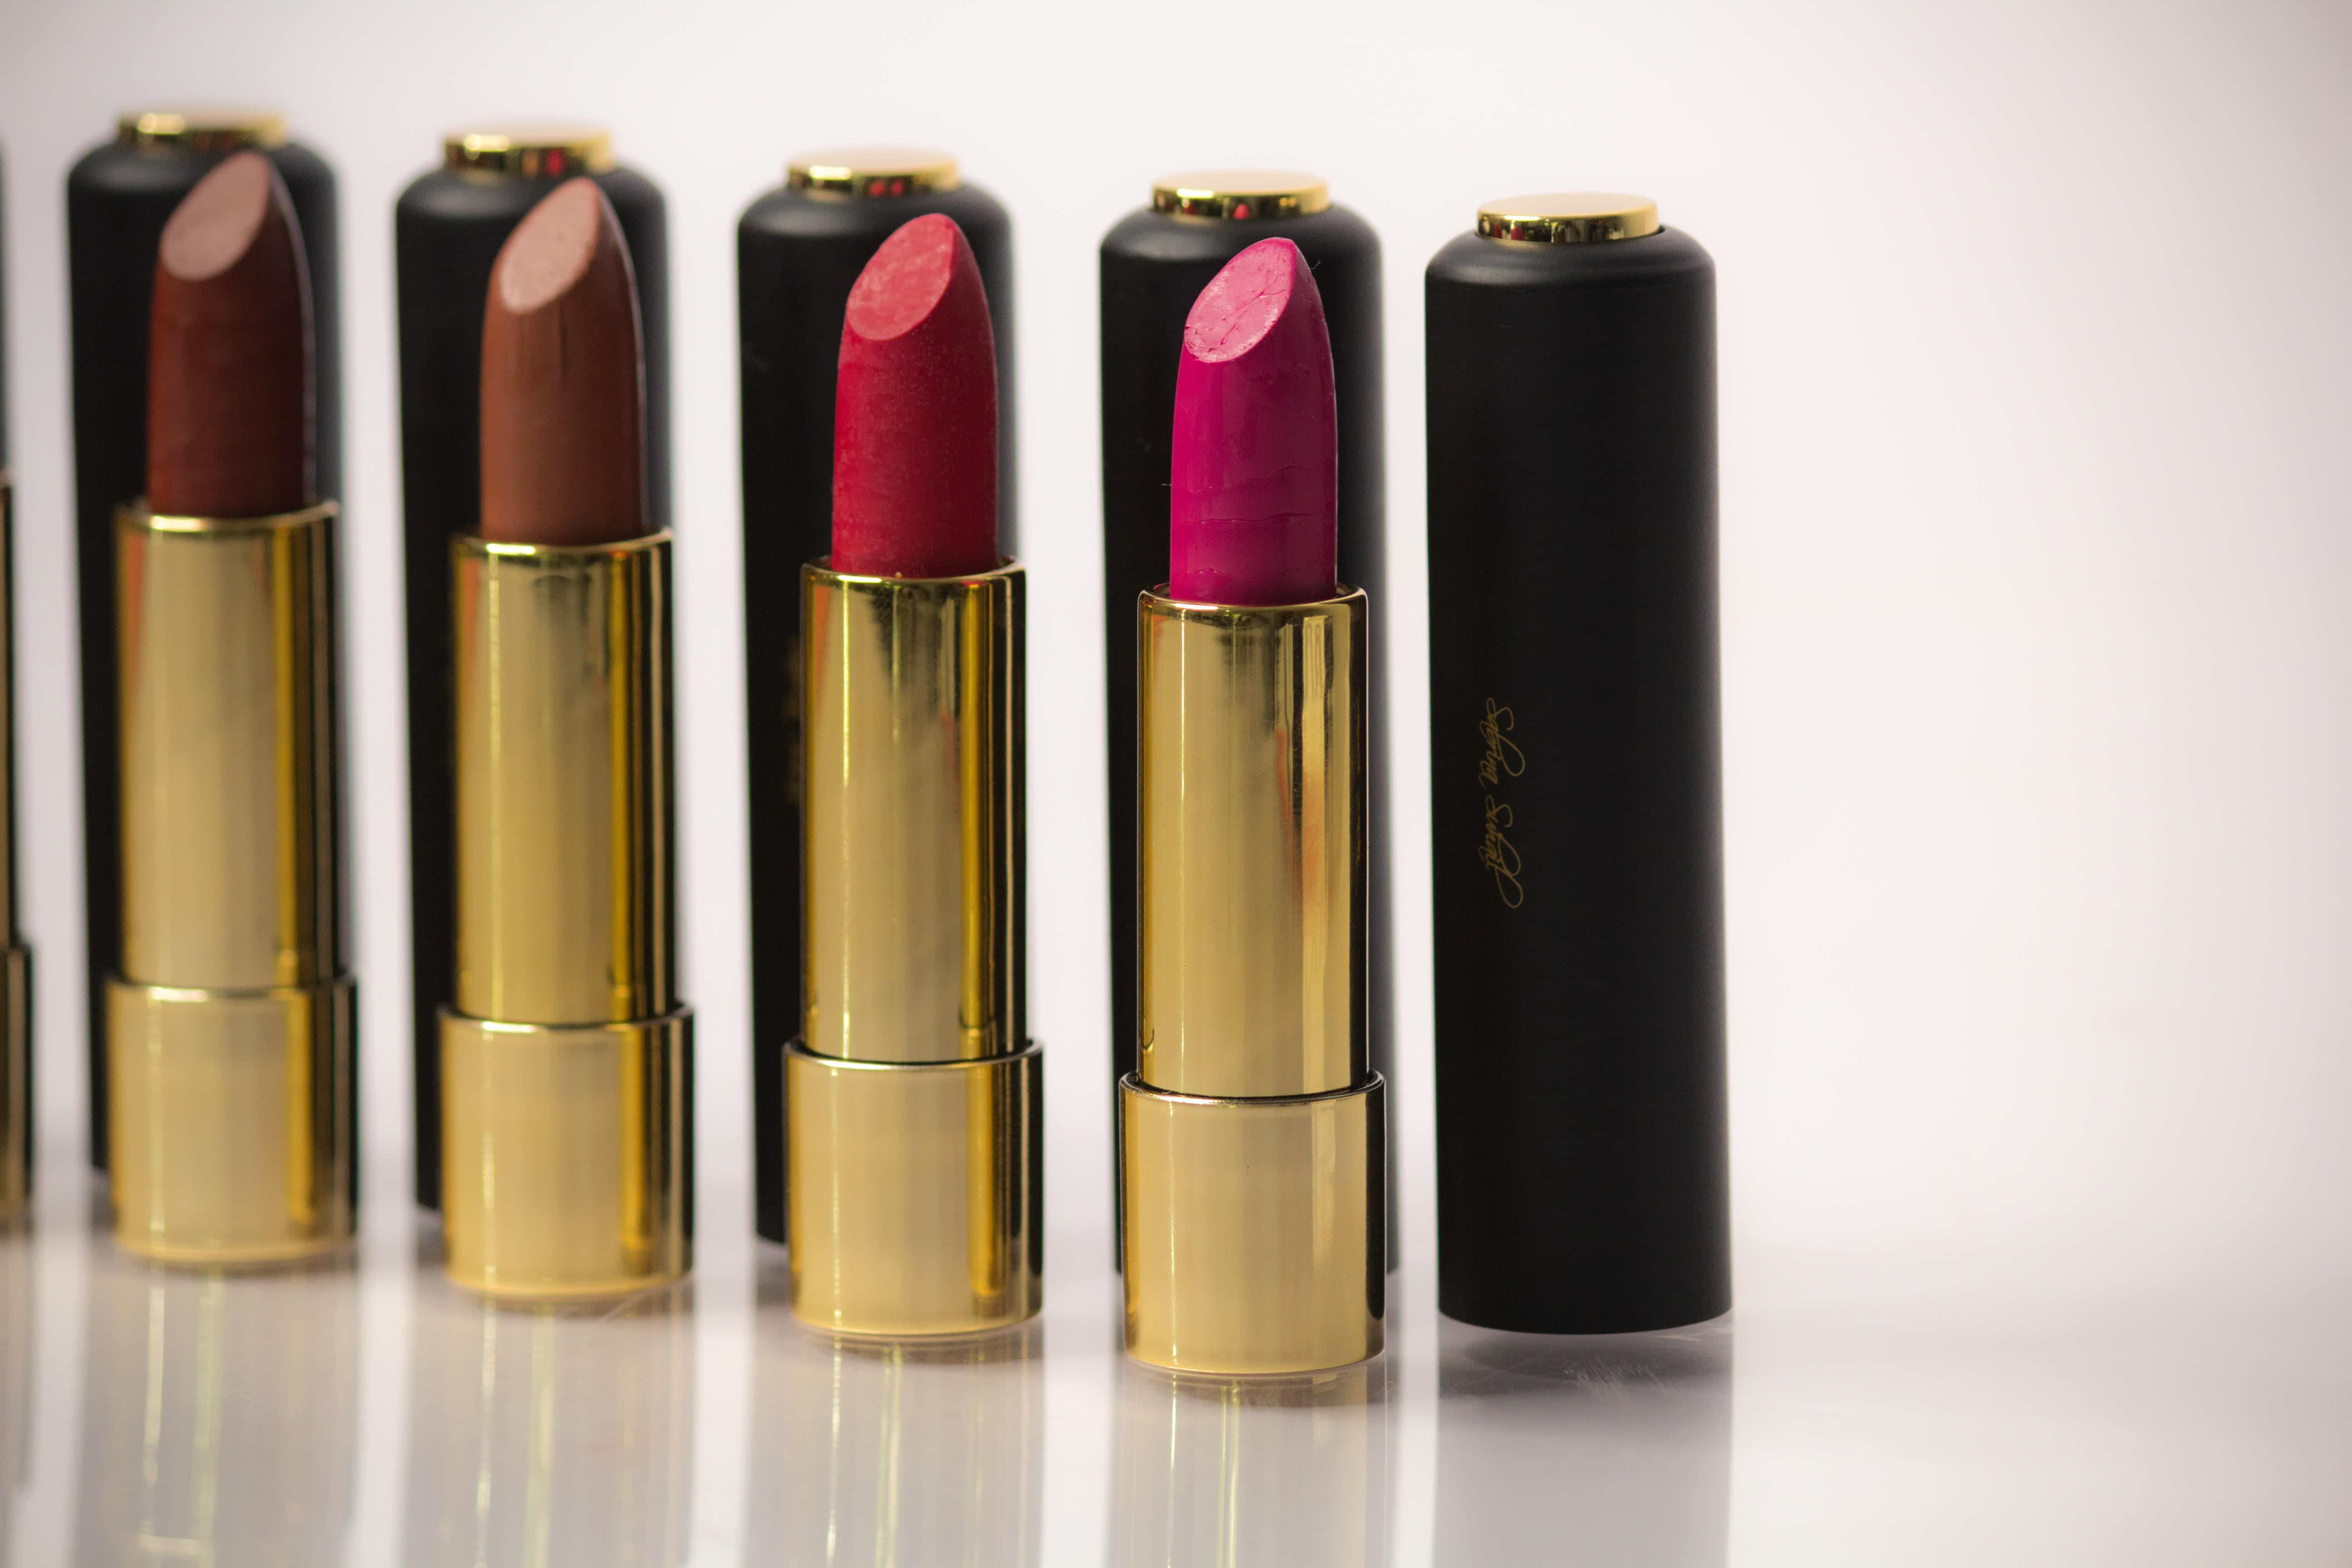 Bespoke lipsticks: How we customised our own lipstick with Sabrina Suhail